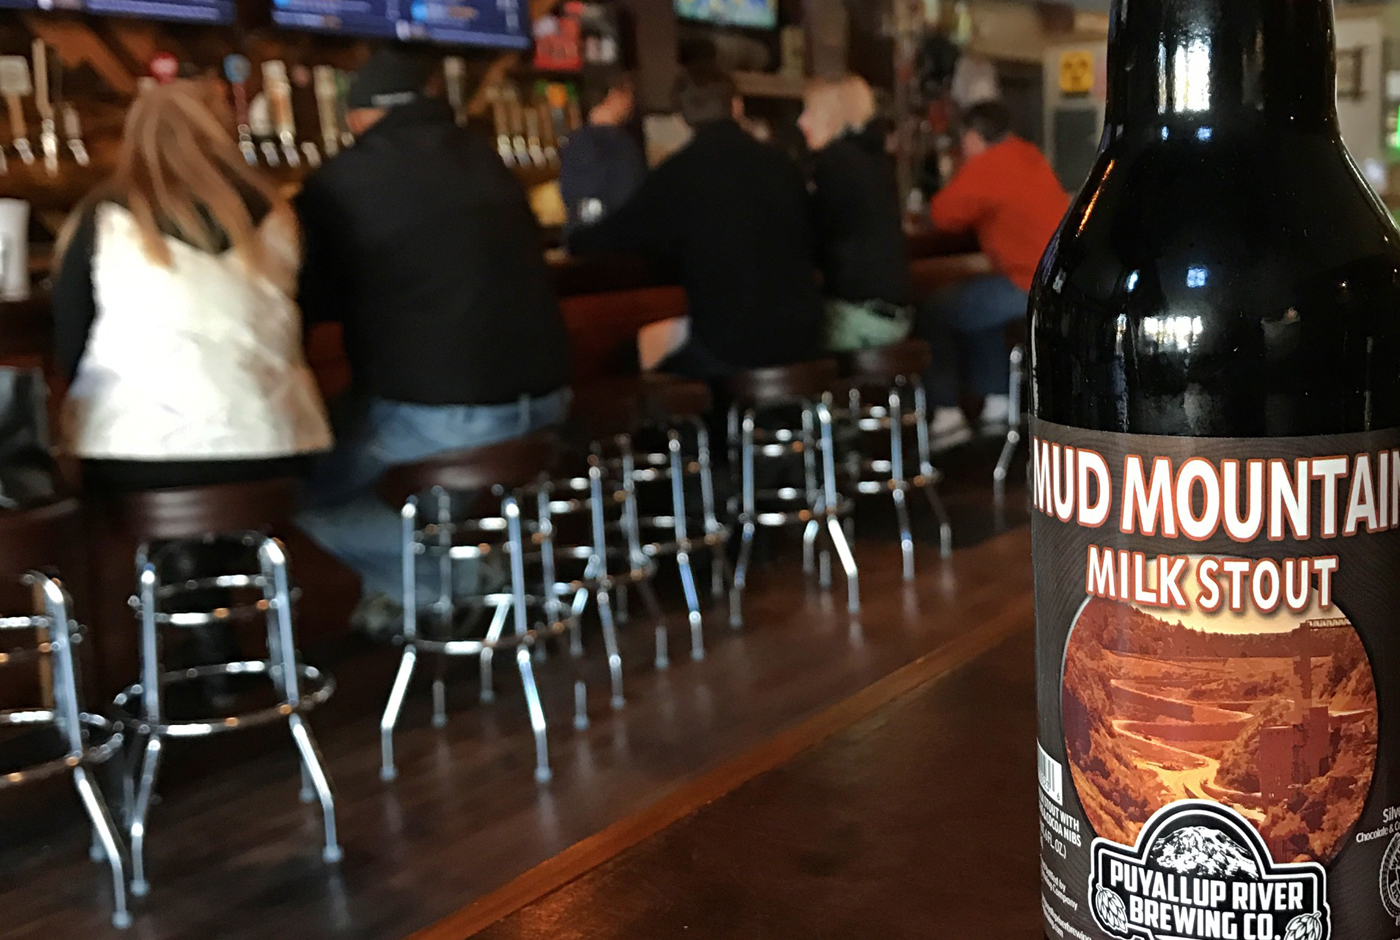 Puyallup-River-Brewing-Mud-Mountain-Milk-Stout